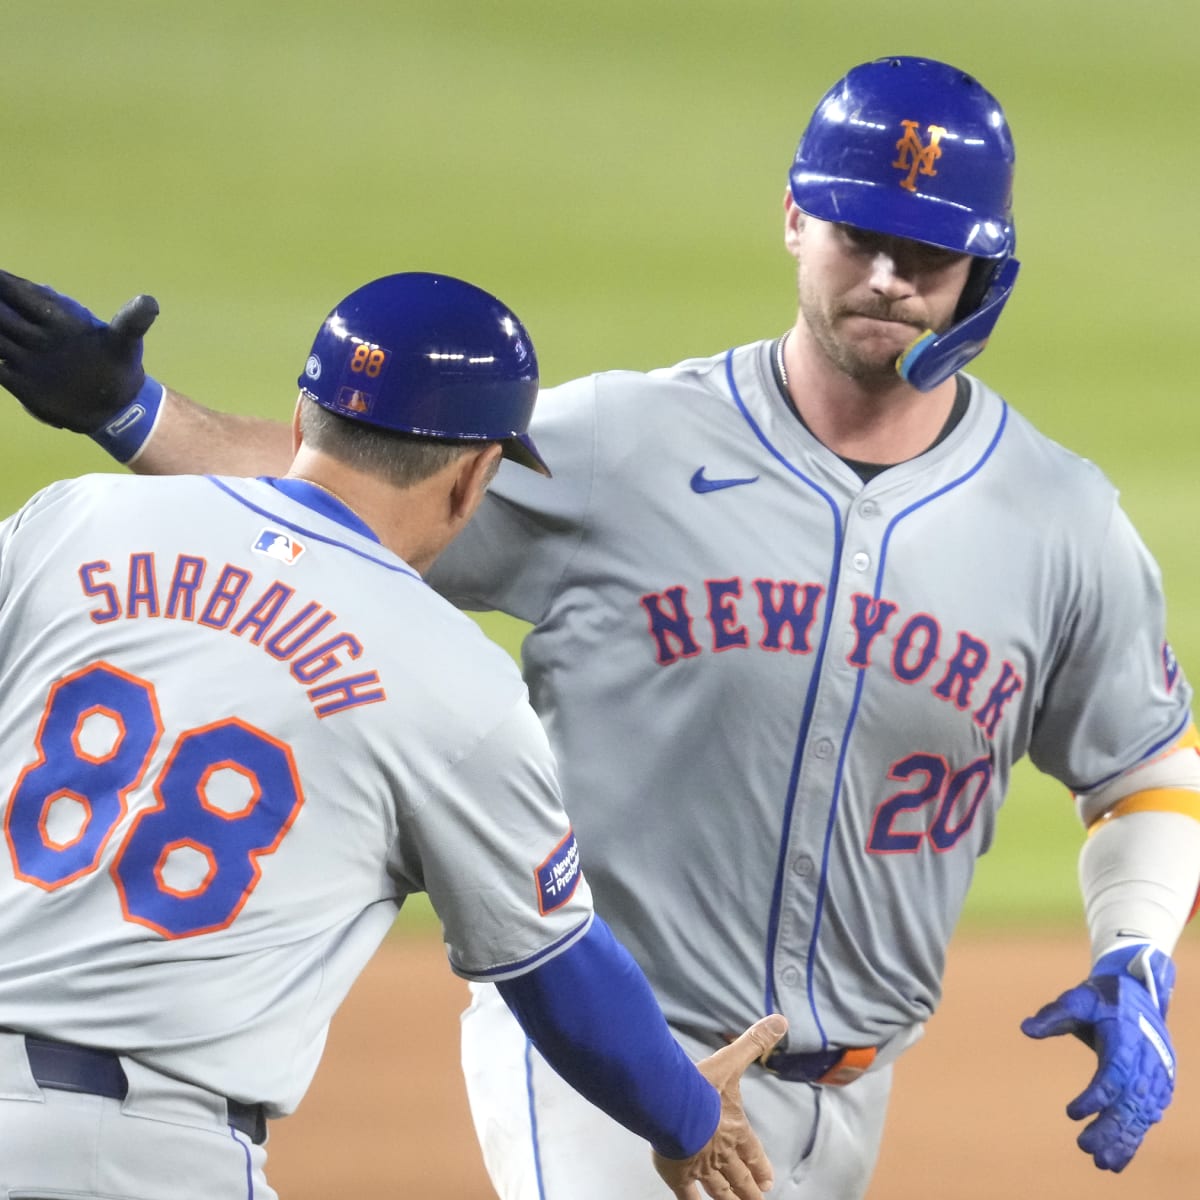 MLB insider speculates that SF Giants could target New York Mets slugger